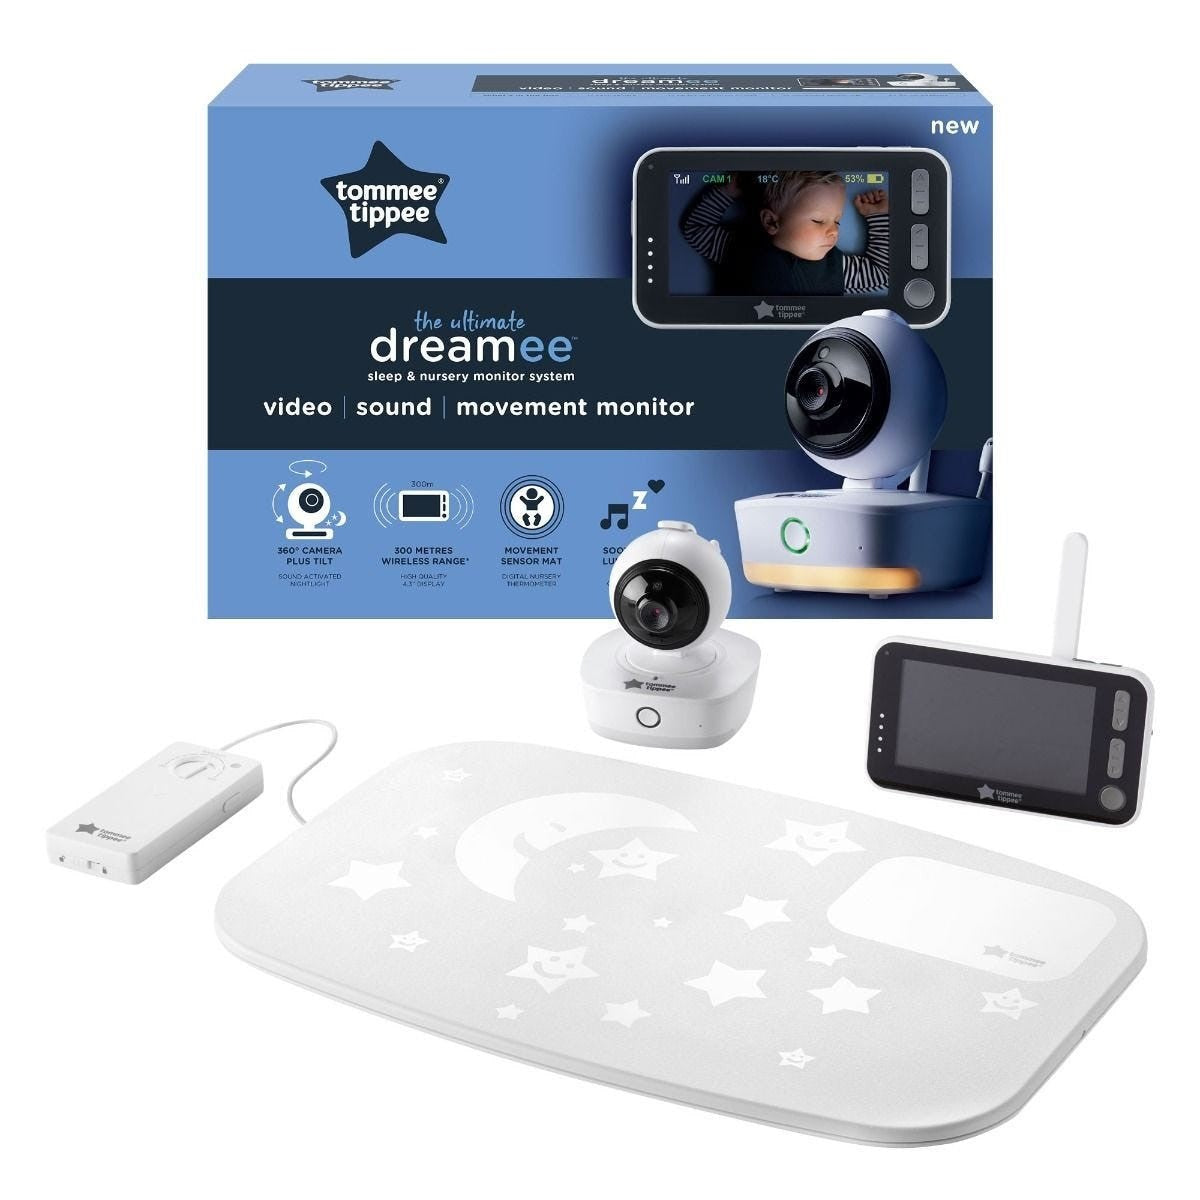 Tommee Tippee Digital Sound, Motion & Video Baby Monitor with Cry Sensor technology